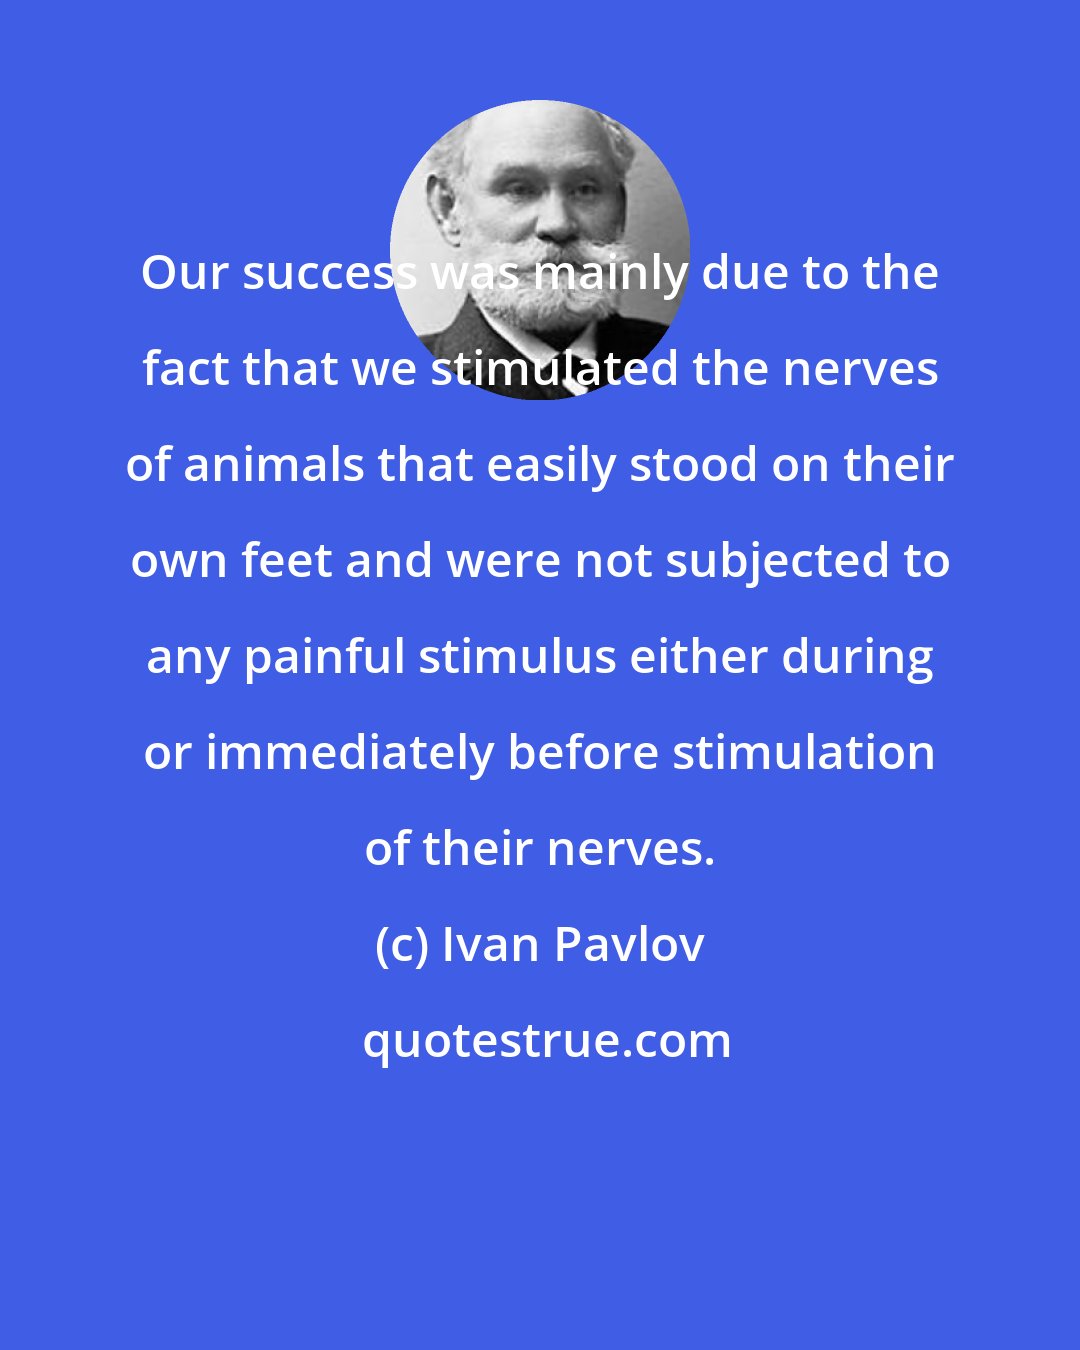 Ivan Pavlov: Our success was mainly due to the fact that we stimulated the nerves of animals that easily stood on their own feet and were not subjected to any painful stimulus either during or immediately before stimulation of their nerves.